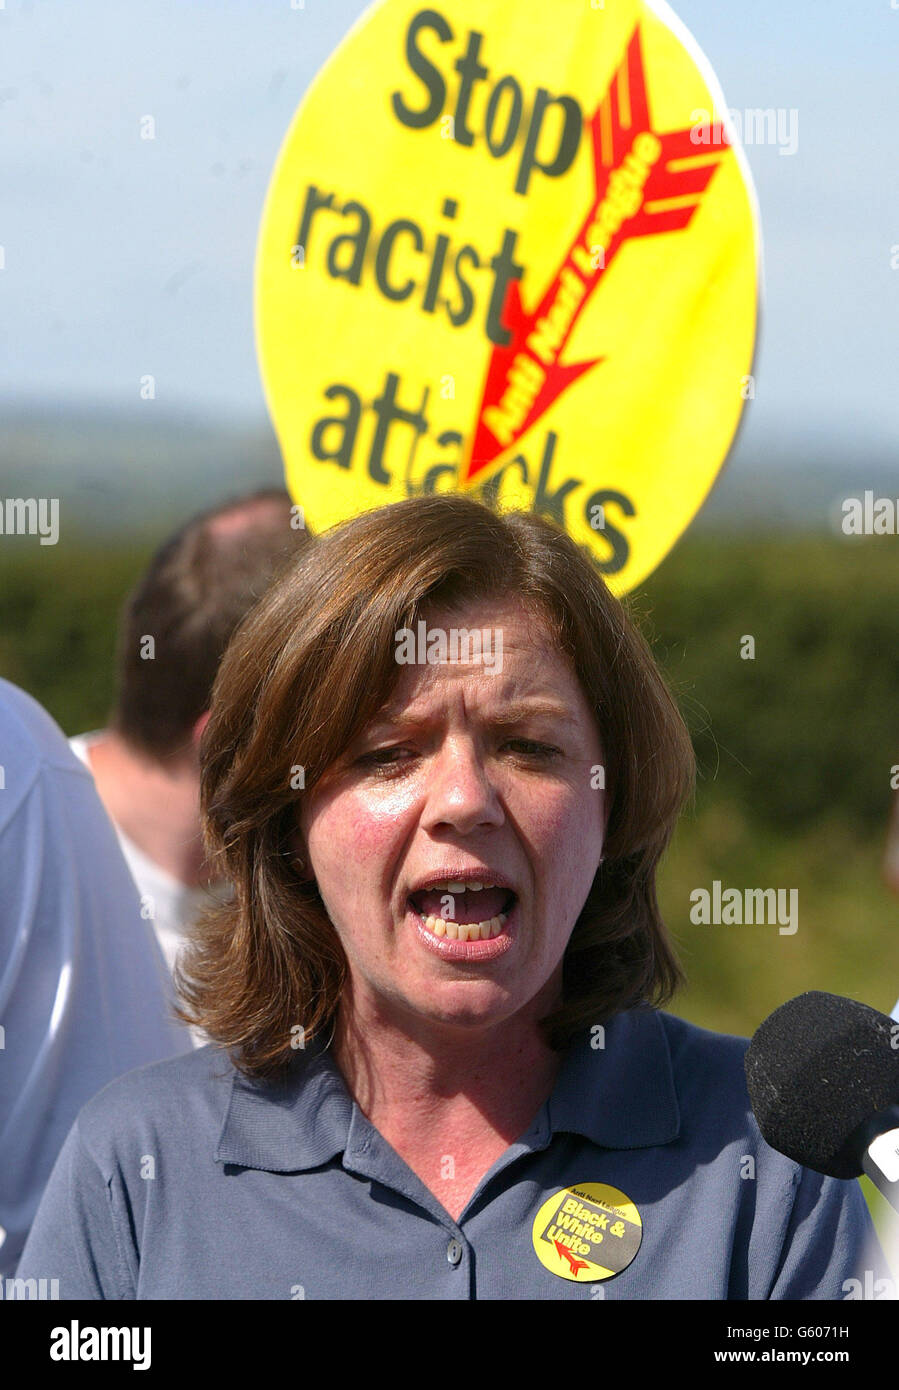 ANL National Organiser, Julie Waterson, speaks during a Anti Nazi League press conference, in Sawley, Lancashire, Members of the anti-racist party are trying to prevent the BNP's two-day carnival in the Sawley area of the Ribble Valley, in Lancashire, from going ahead. Stock Photo